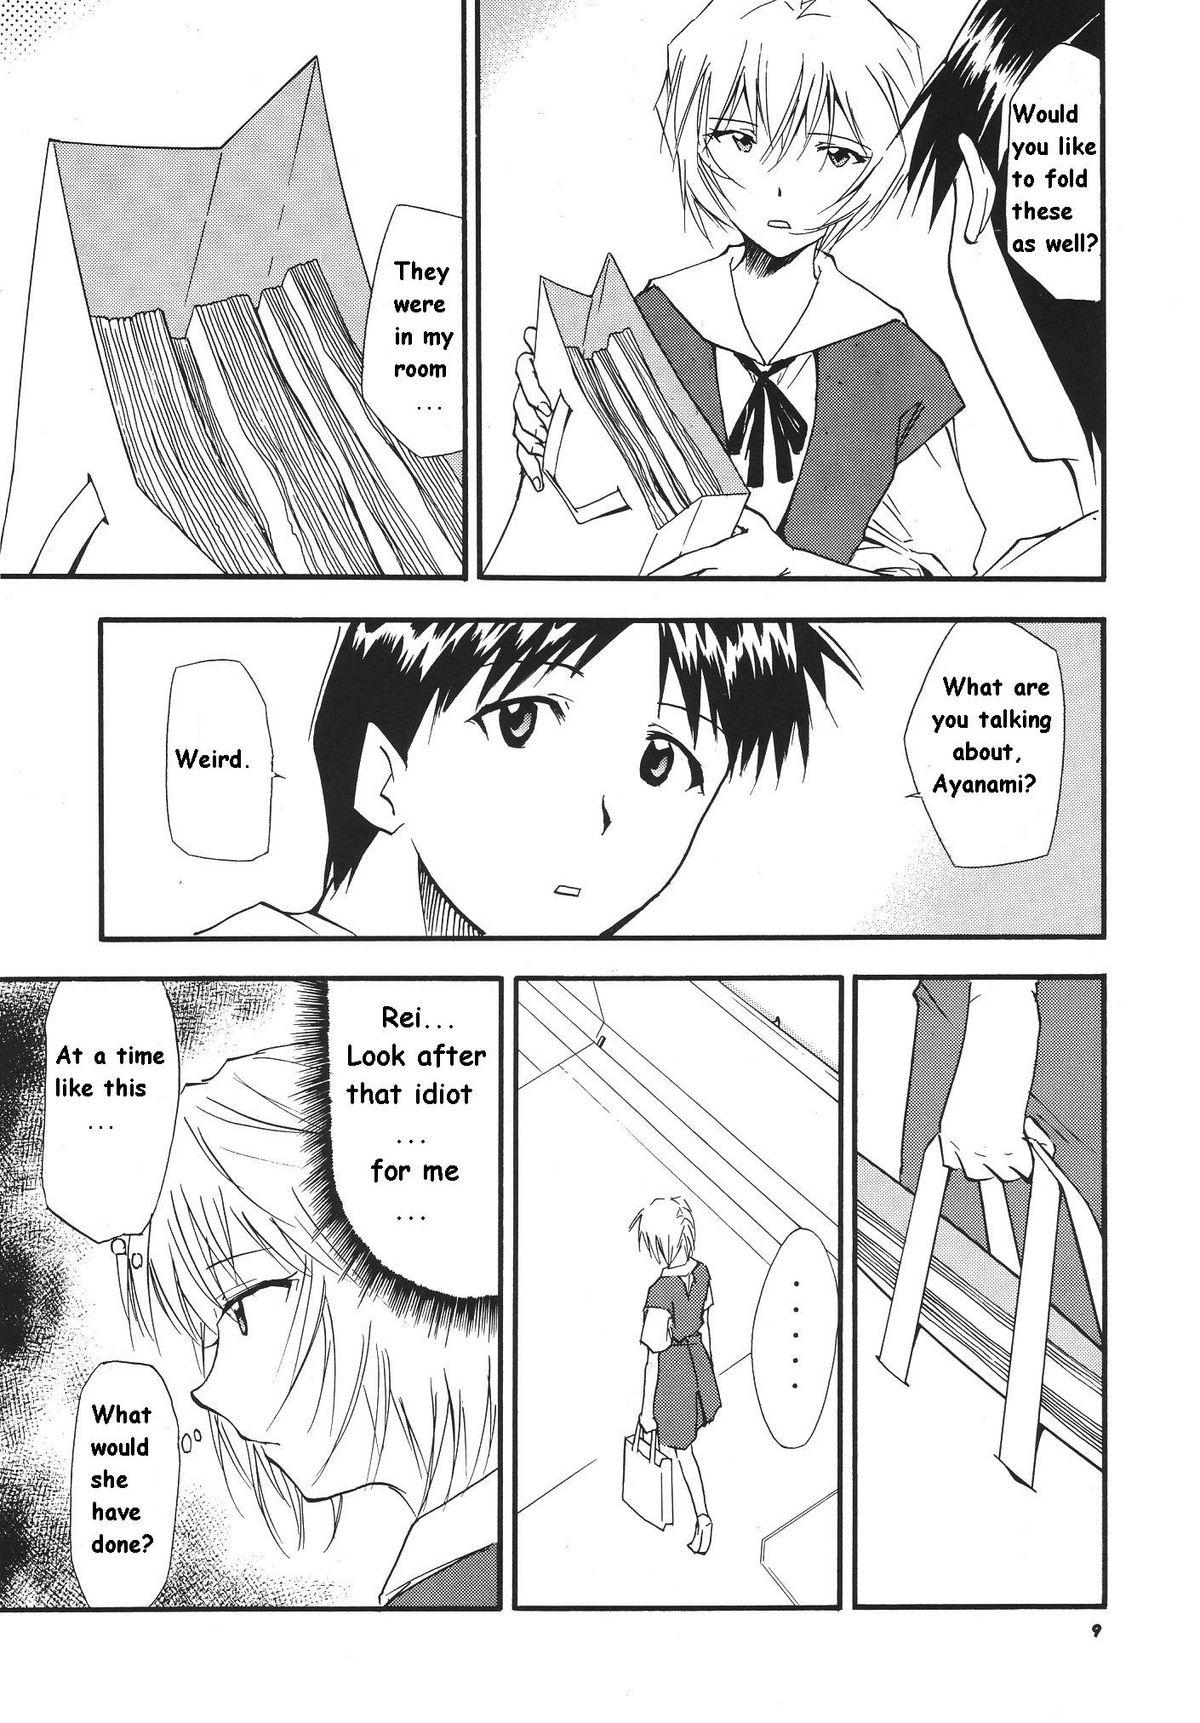 Cheating Wife RE-TAKE 3 - Neon genesis evangelion Camwhore - Page 7